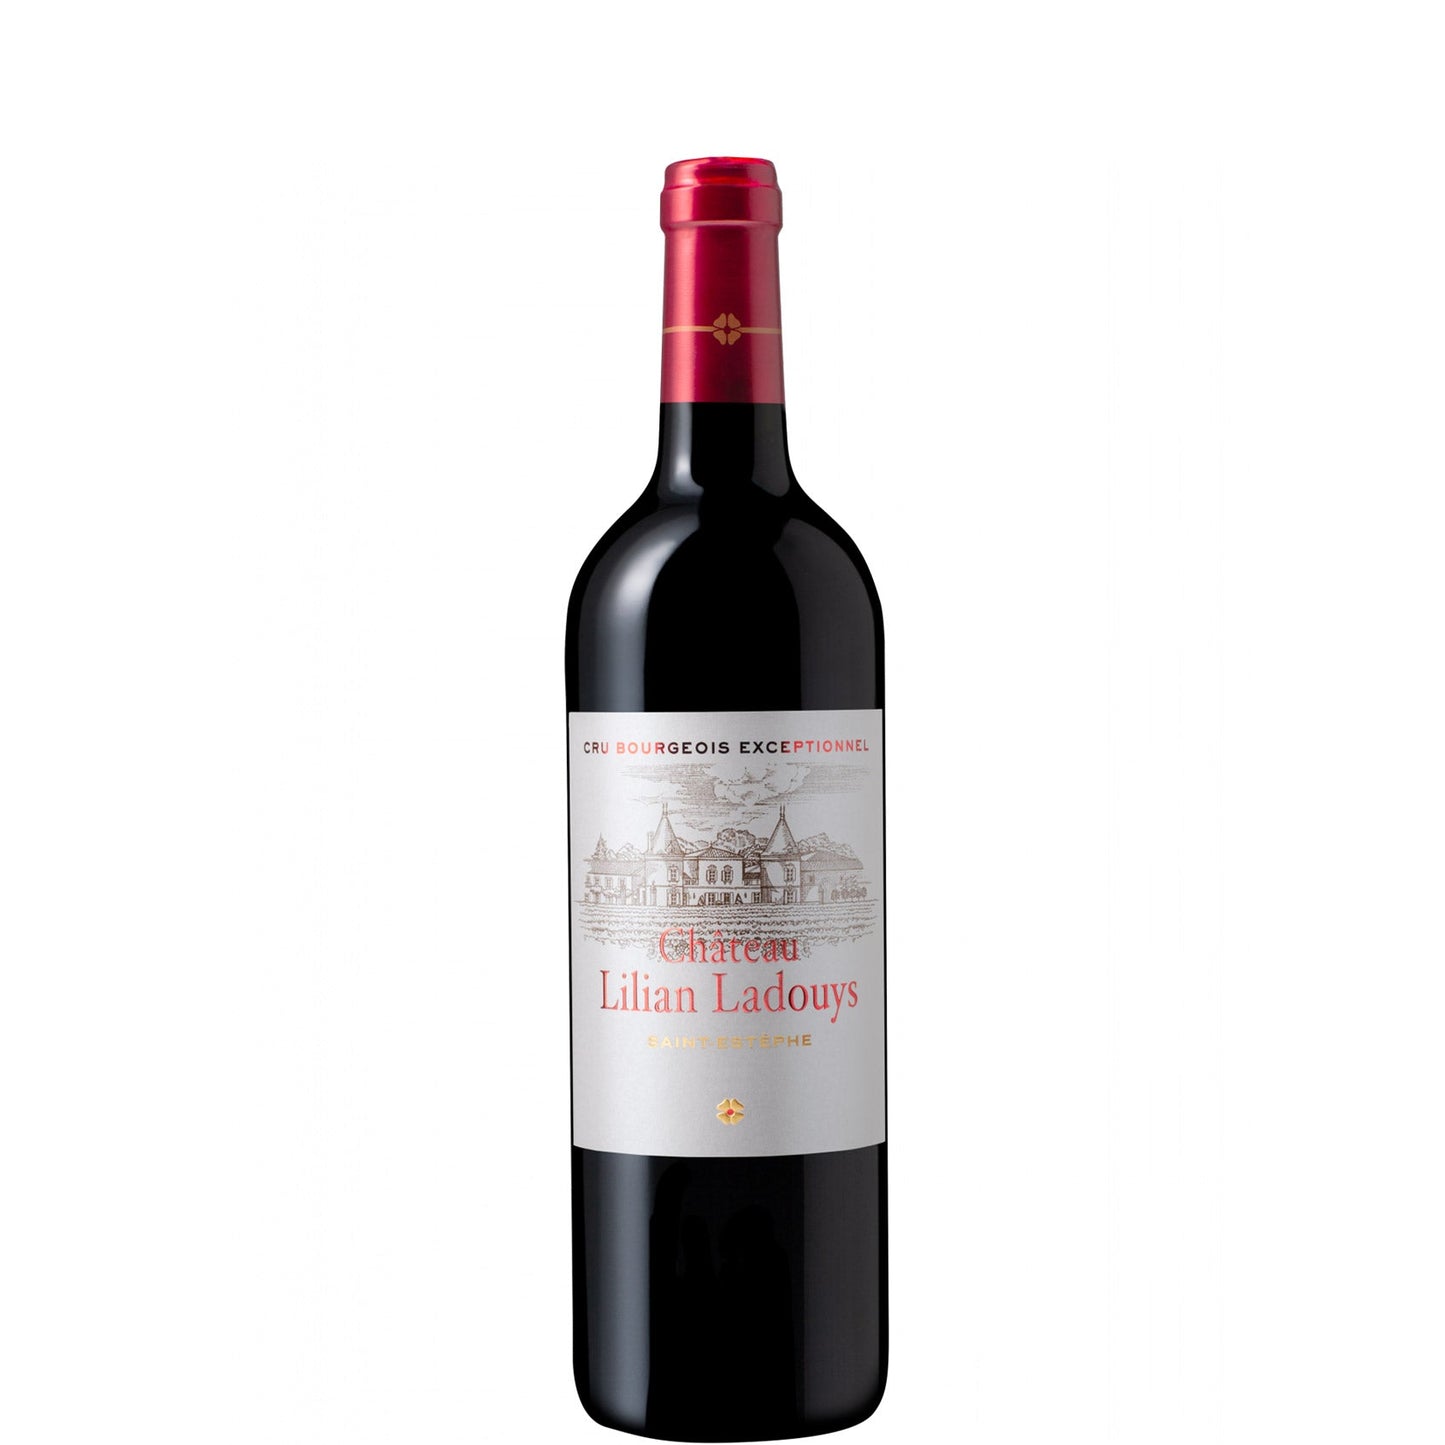 Château Lilian Ladouys Cru Bourgeois Exceptionnel, 2020